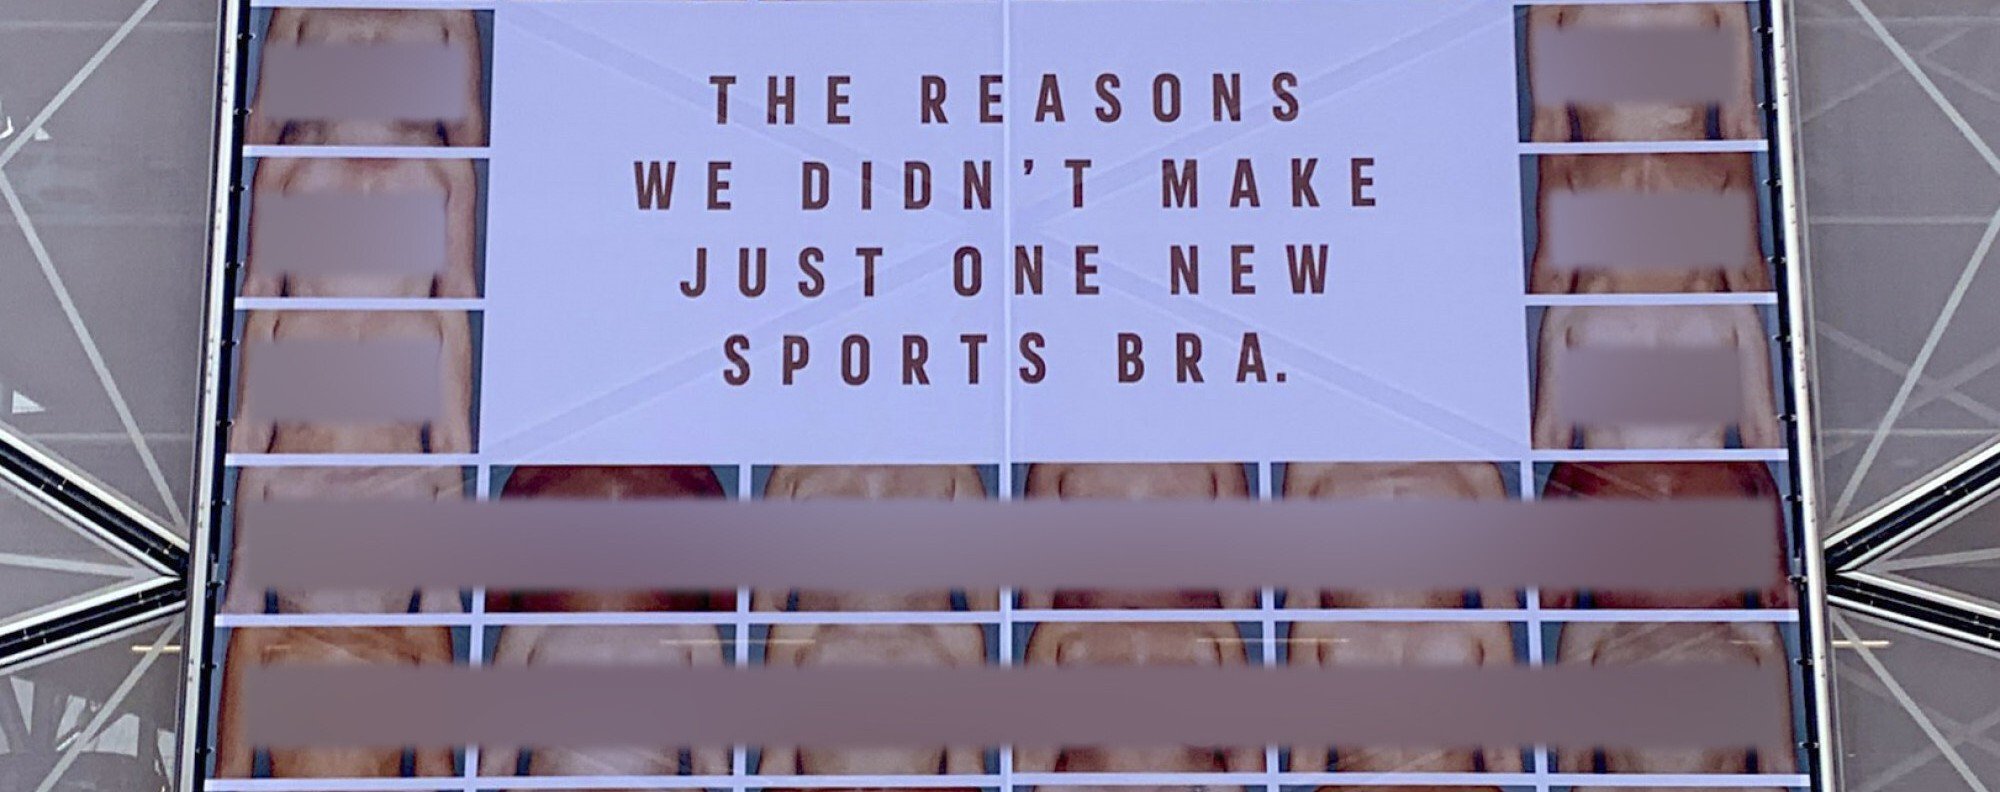 Adidas sports bras breasts ad: Are naked bodies accepted yet?